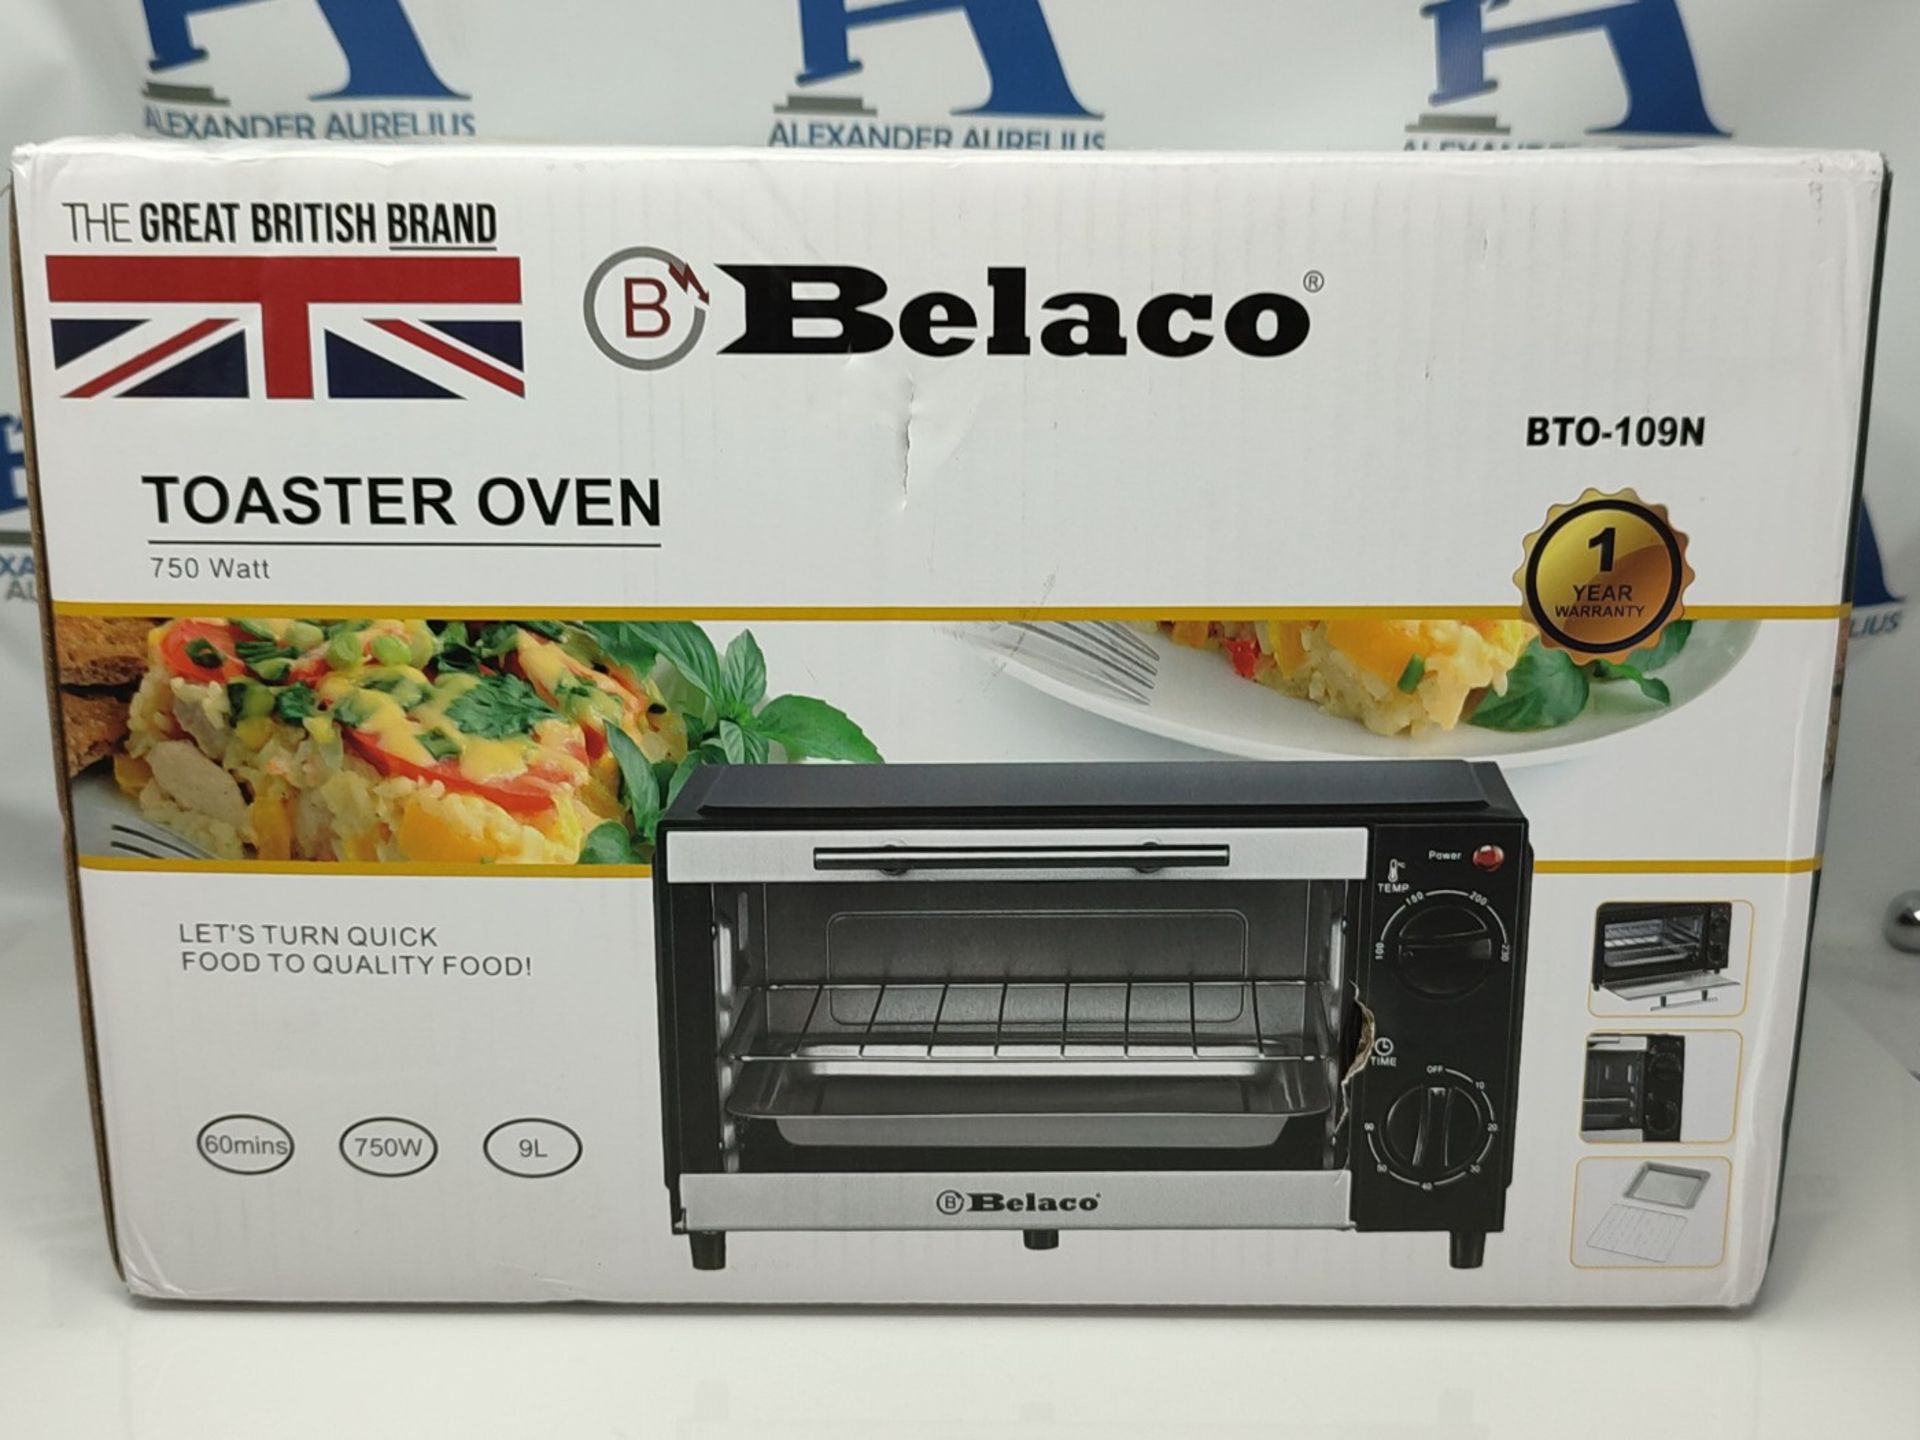 Belaco BTO-109N Mini 9L Toaster Oven Tabletop Cooking Baking Portable Oven 750w 60 min